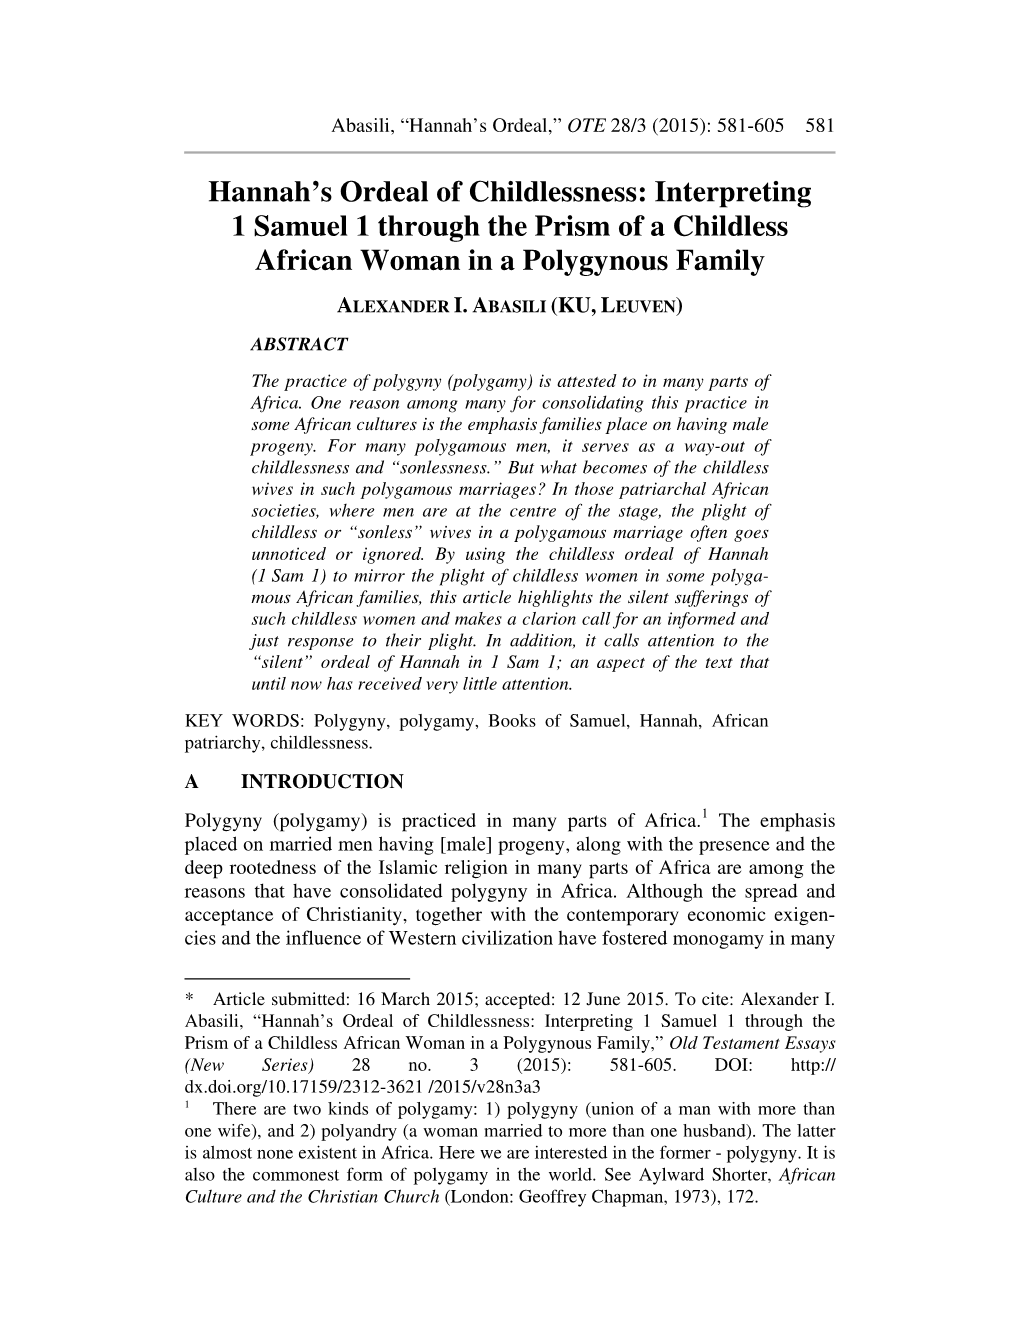 Hannah's Ordeal of Childlessness